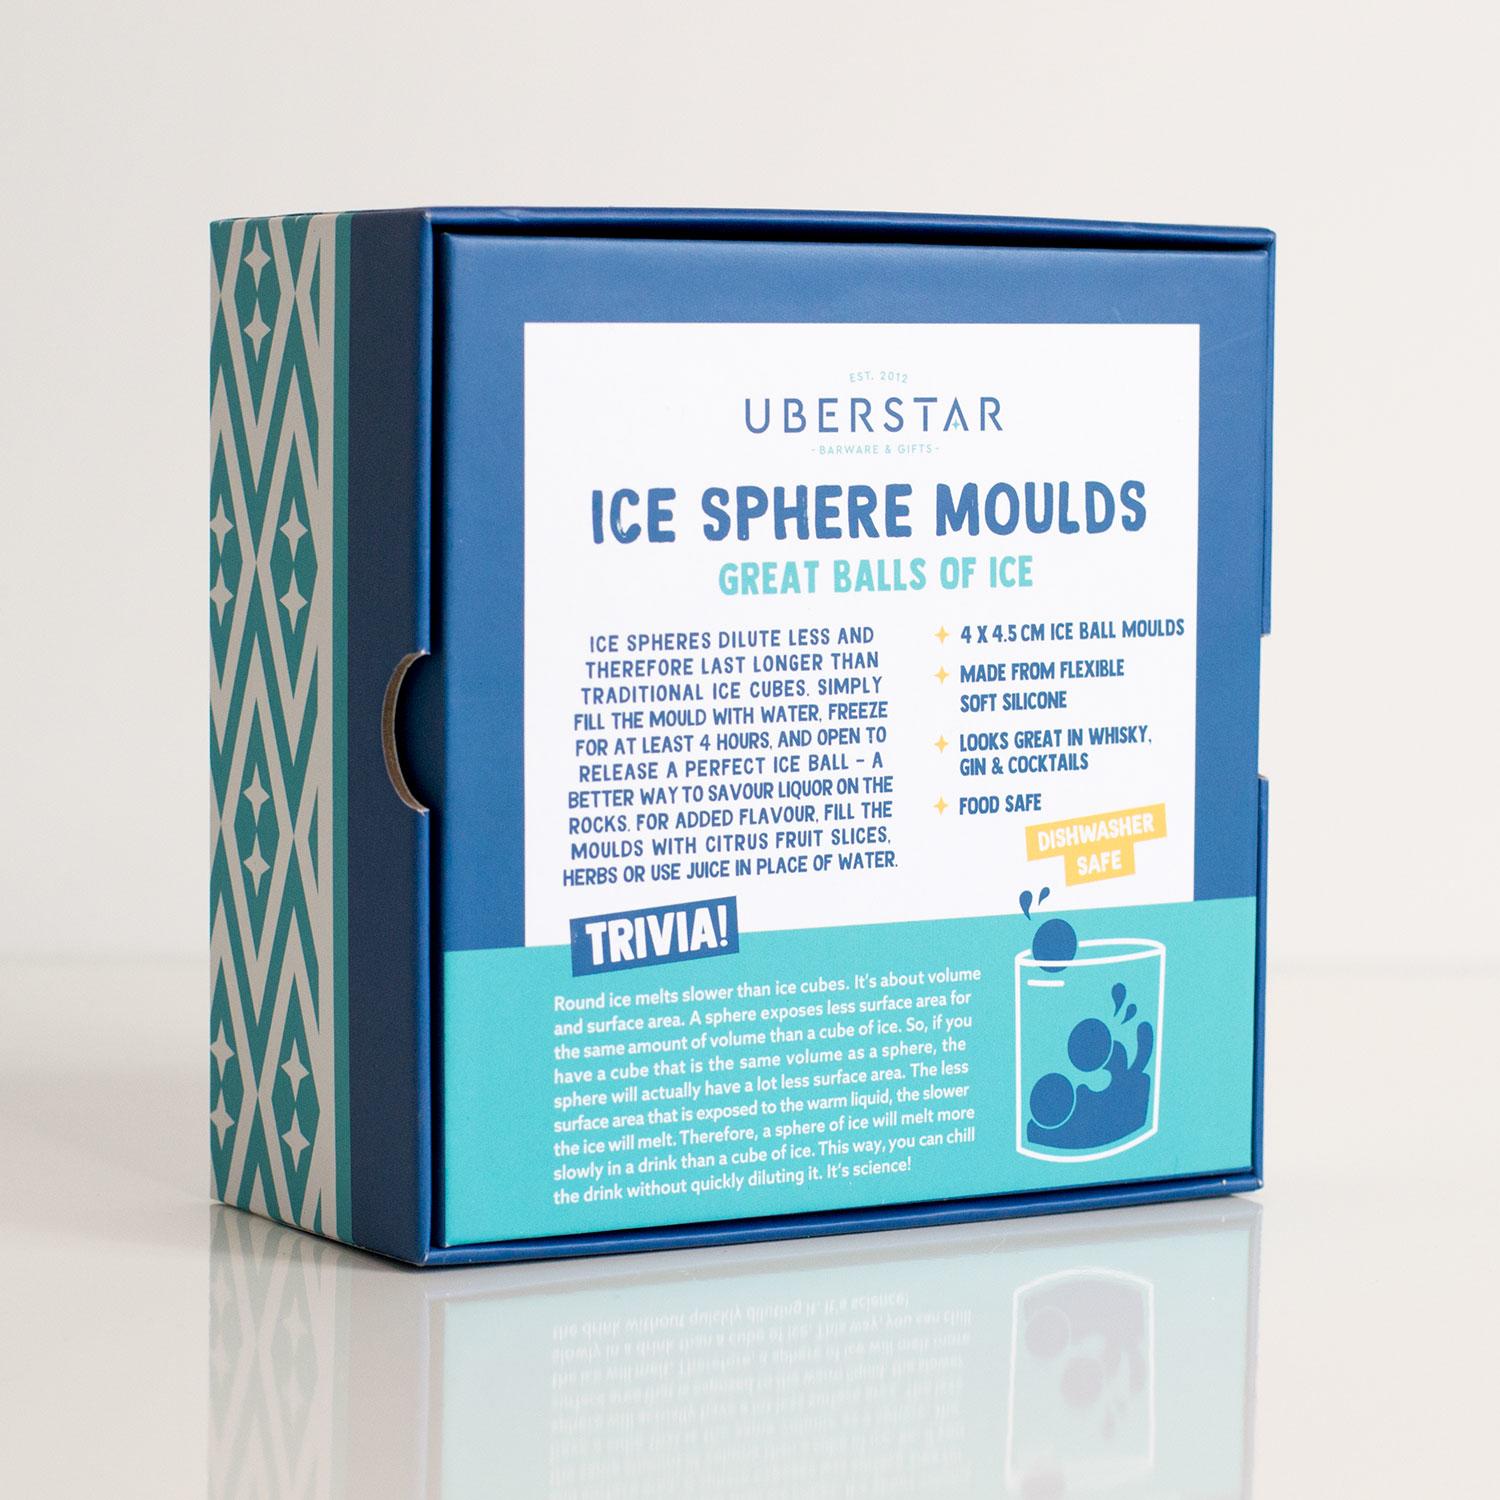 Uberstar Ice Sphere Moulds - Only £14.99